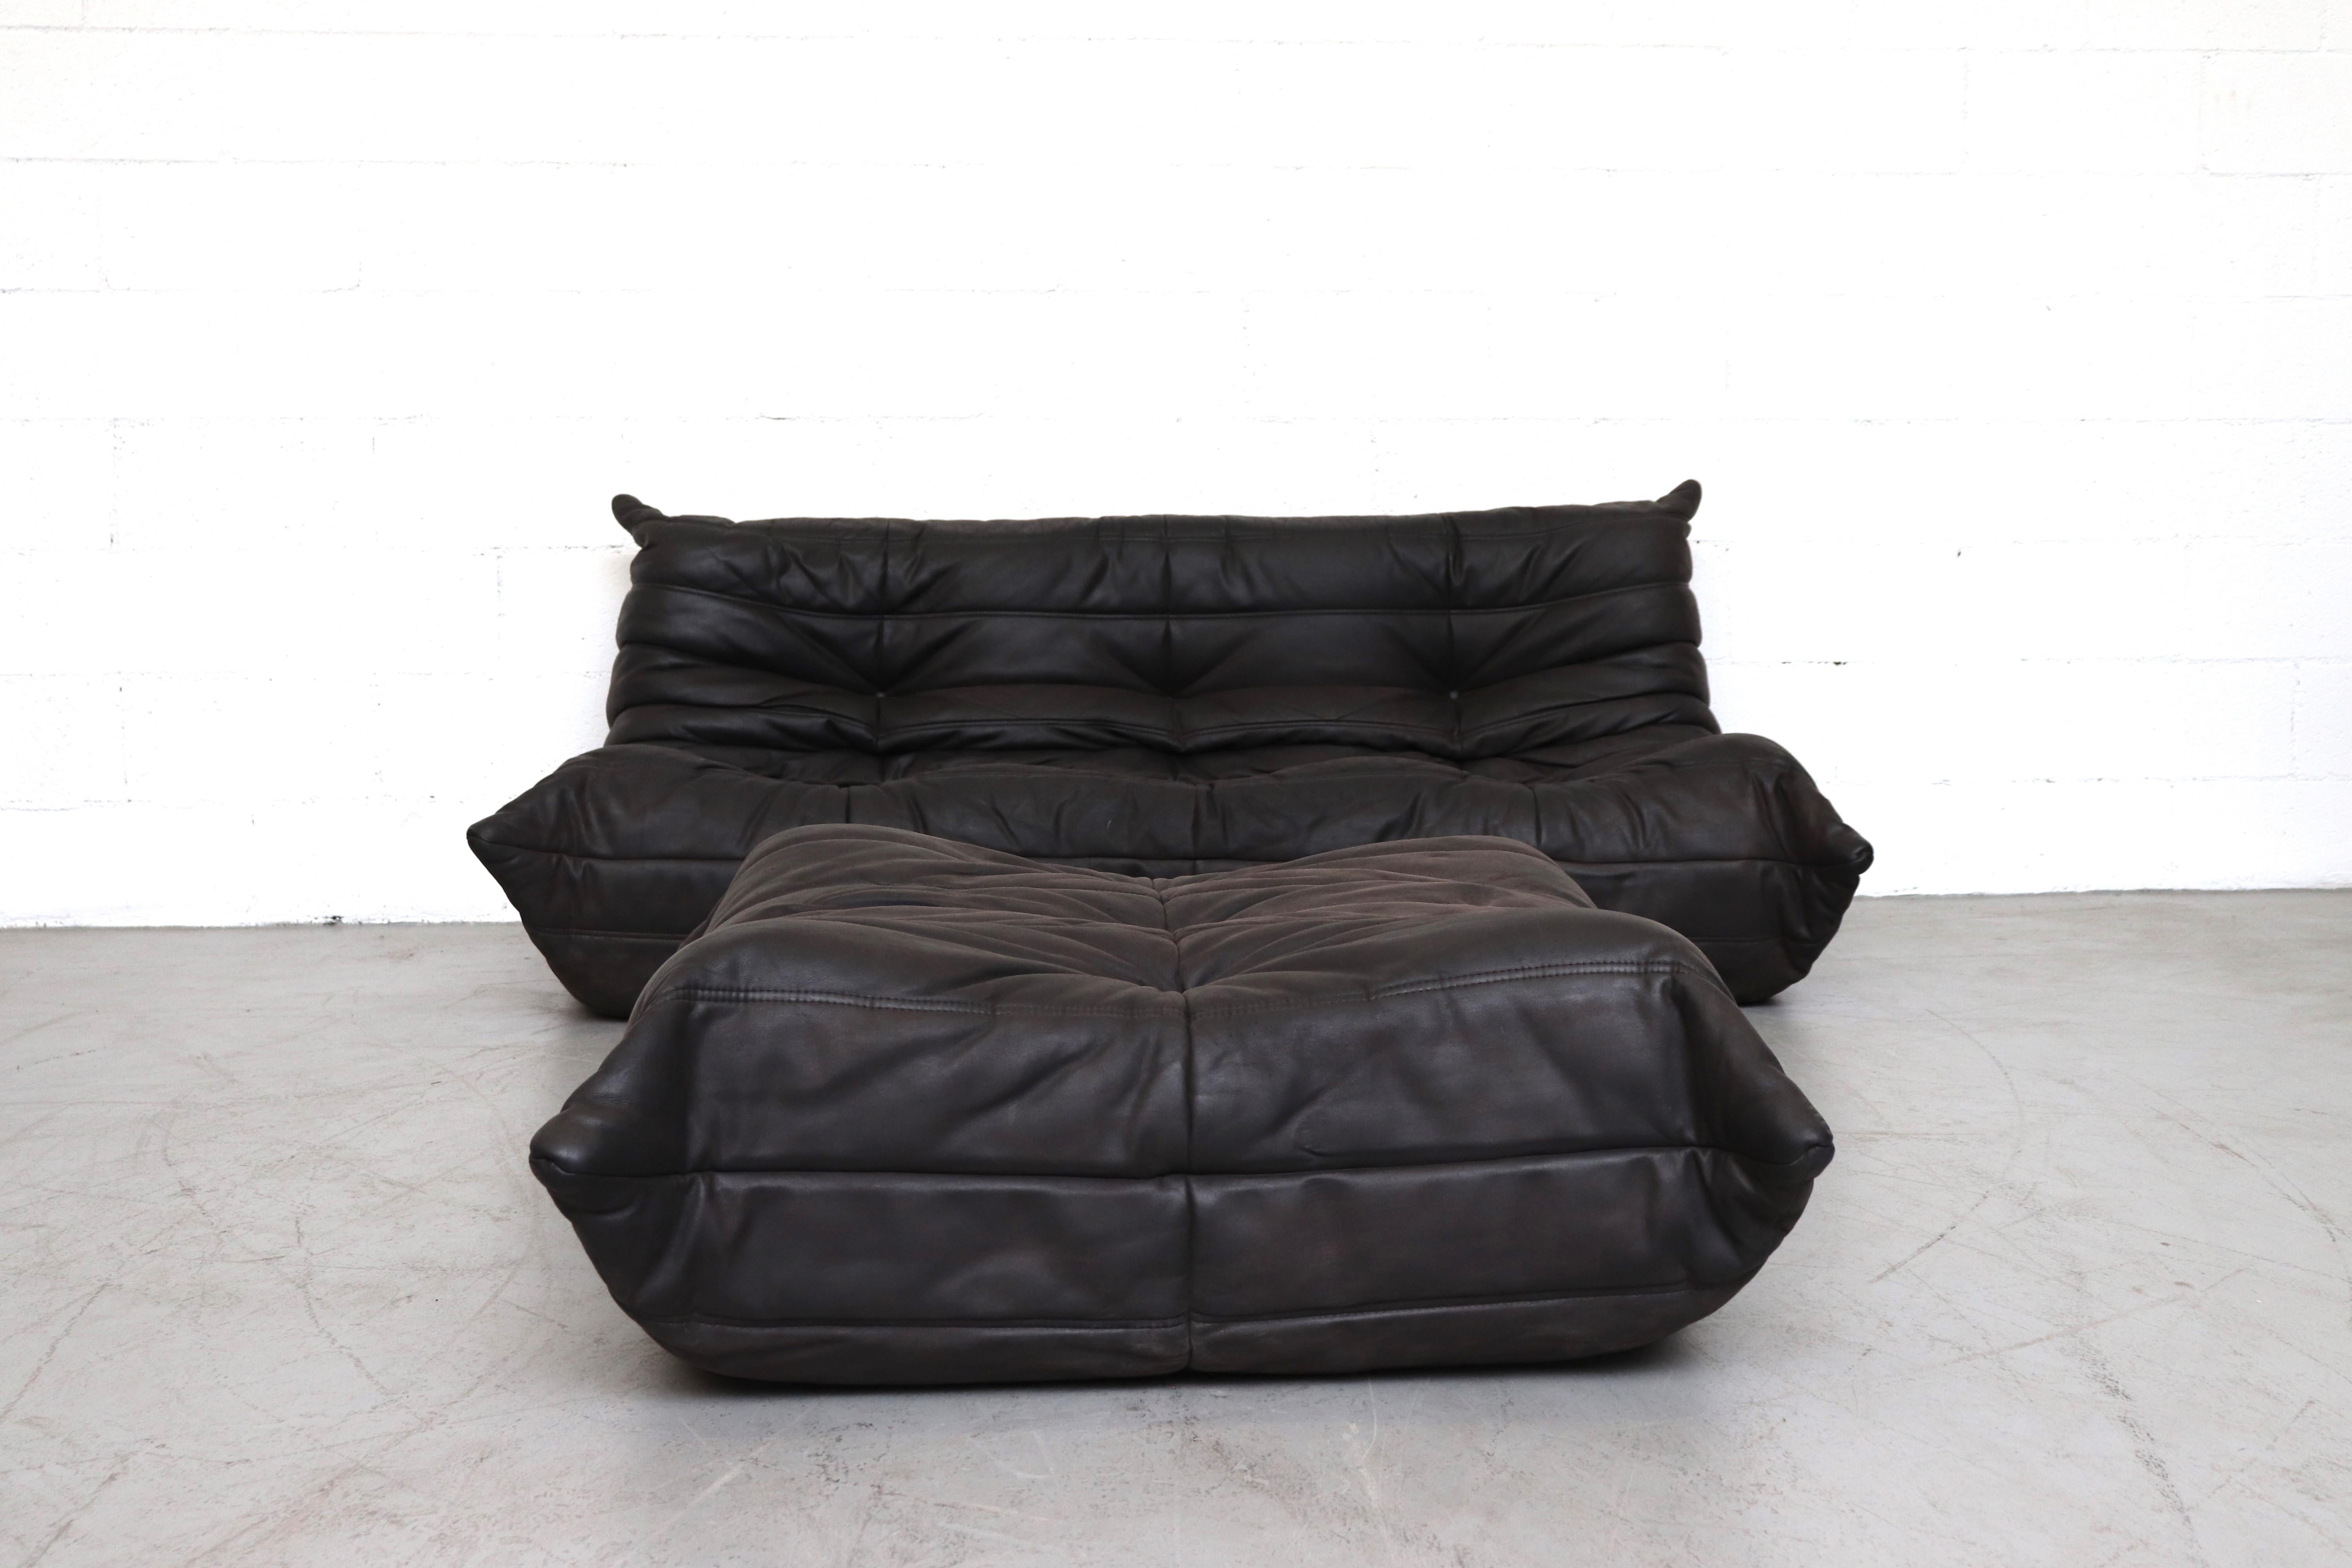 Ligne Roset 'TOGO' Matte Black Leather 3 Seater Sofa with Matching Ottoman. Designed by Michel Ducaroy. In Original Condition with Visible Wear and Patina. Another Similar Loveseat is available and listed separately.

Ottoman measures: 36 x 30.5 x